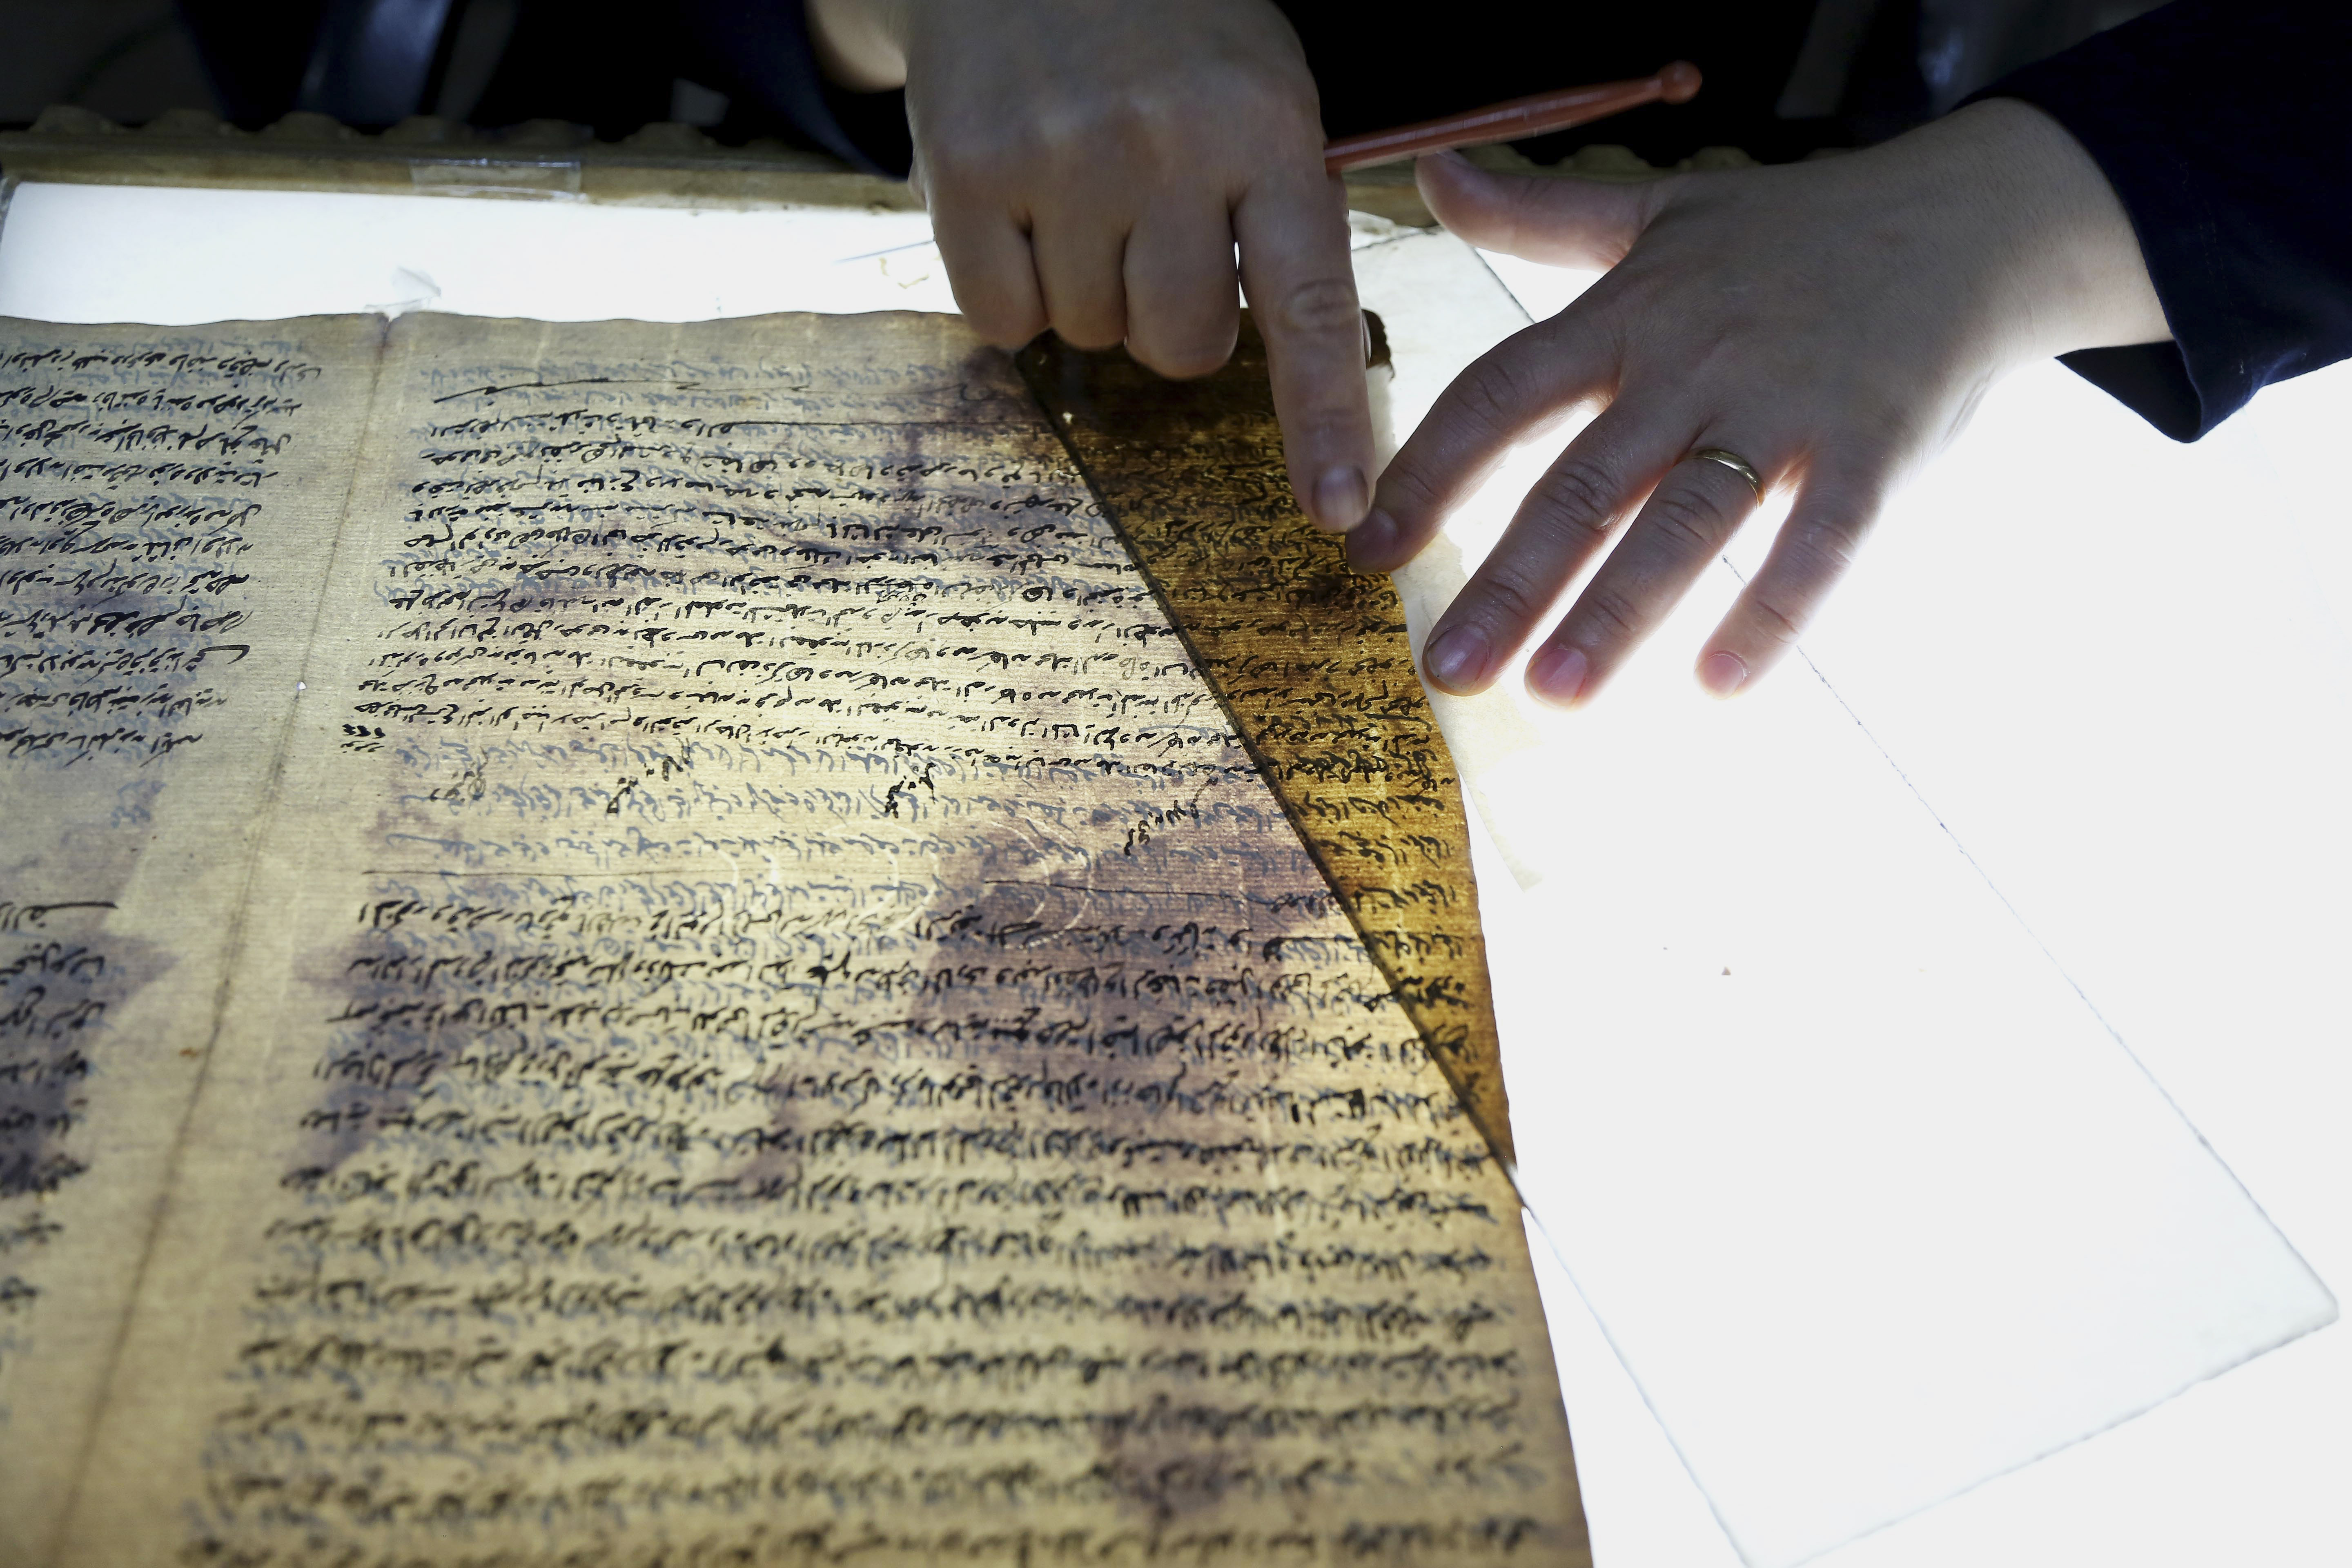 In this Tuesday, July 28, 2015 photo, a member of the library restoration staff works on a damaged document at the Baghdad National Library in Iraq. As the Islamic State militants now set out to destroy Iraq's history and culture, including irreplaceable books and manuscripts kept in the militant-held city of Mosul, a major preservation and digitization project is underway in the capital to safeguard a millennia worth of history.Photo: AP 